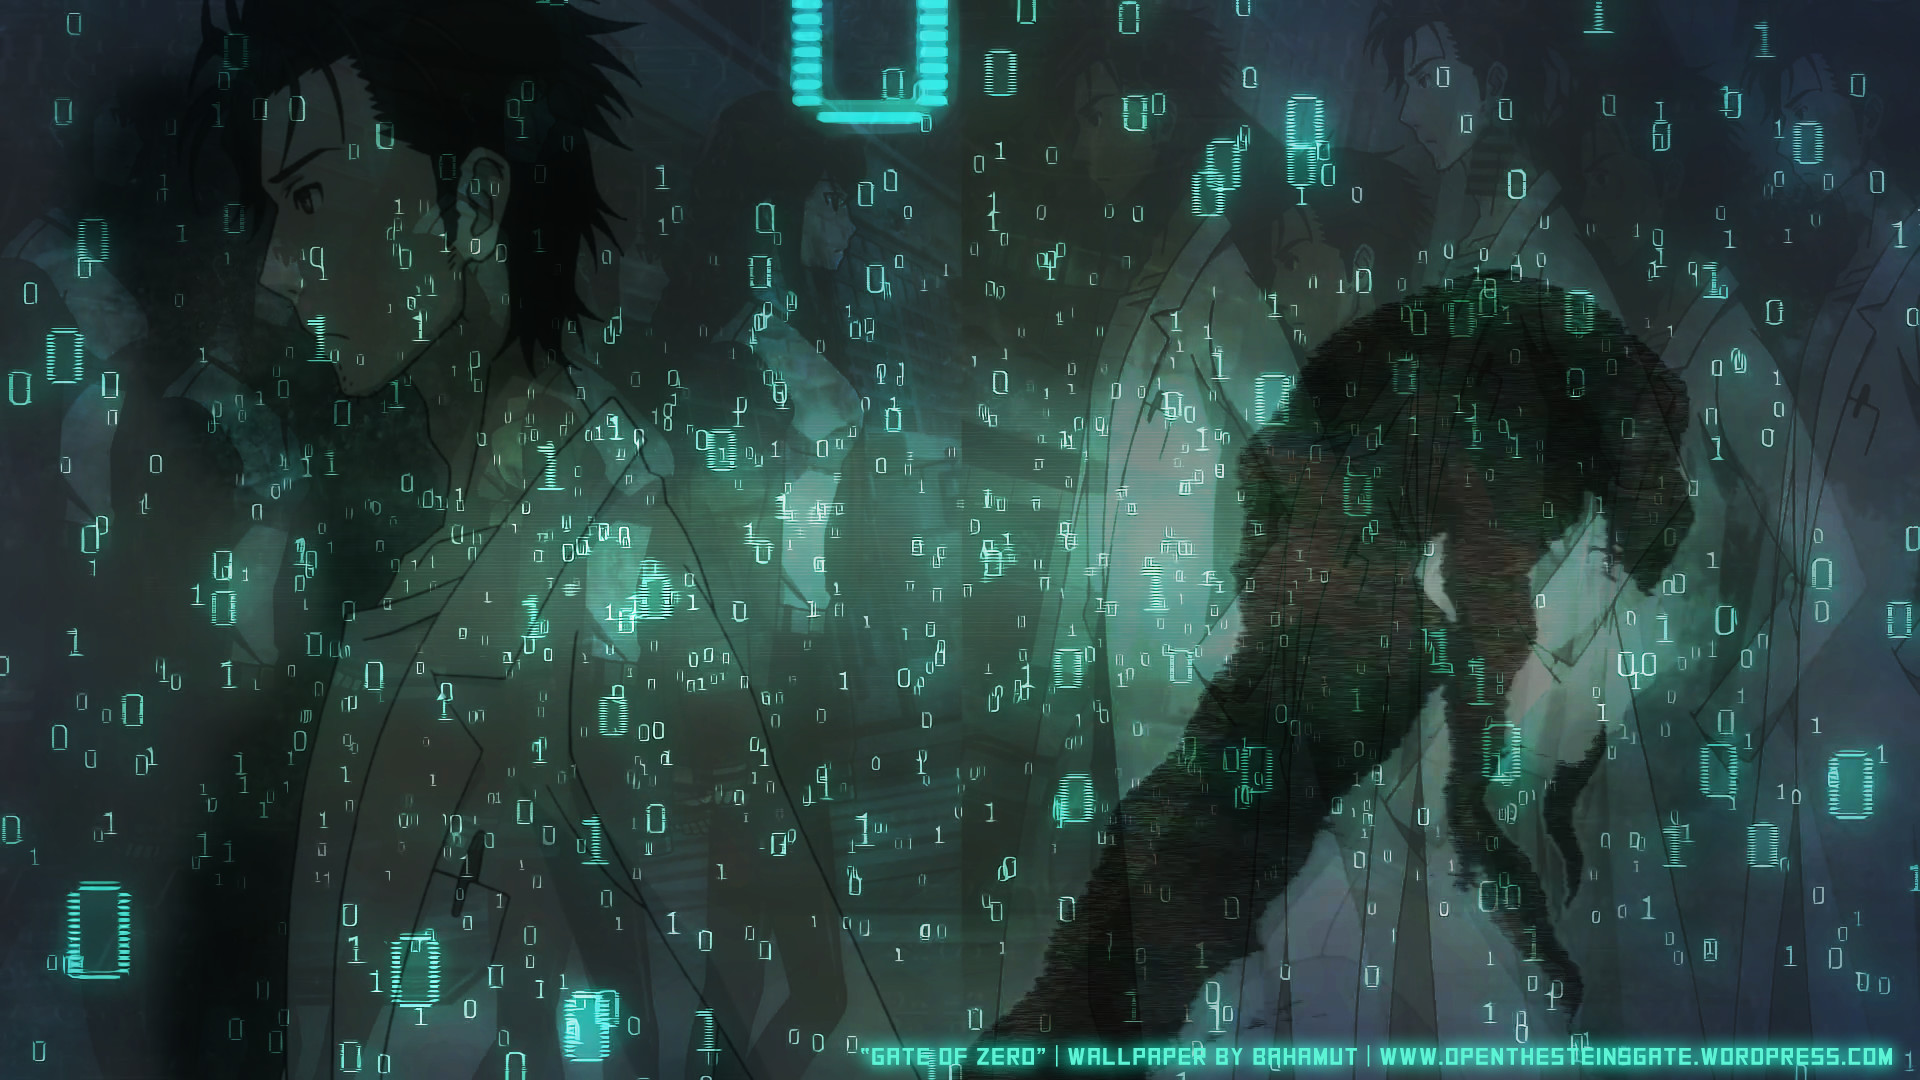 1920x1080 "Gate of Zero" a wallpaper that I made inspired by the Steins;Gate Zero's  Opening.